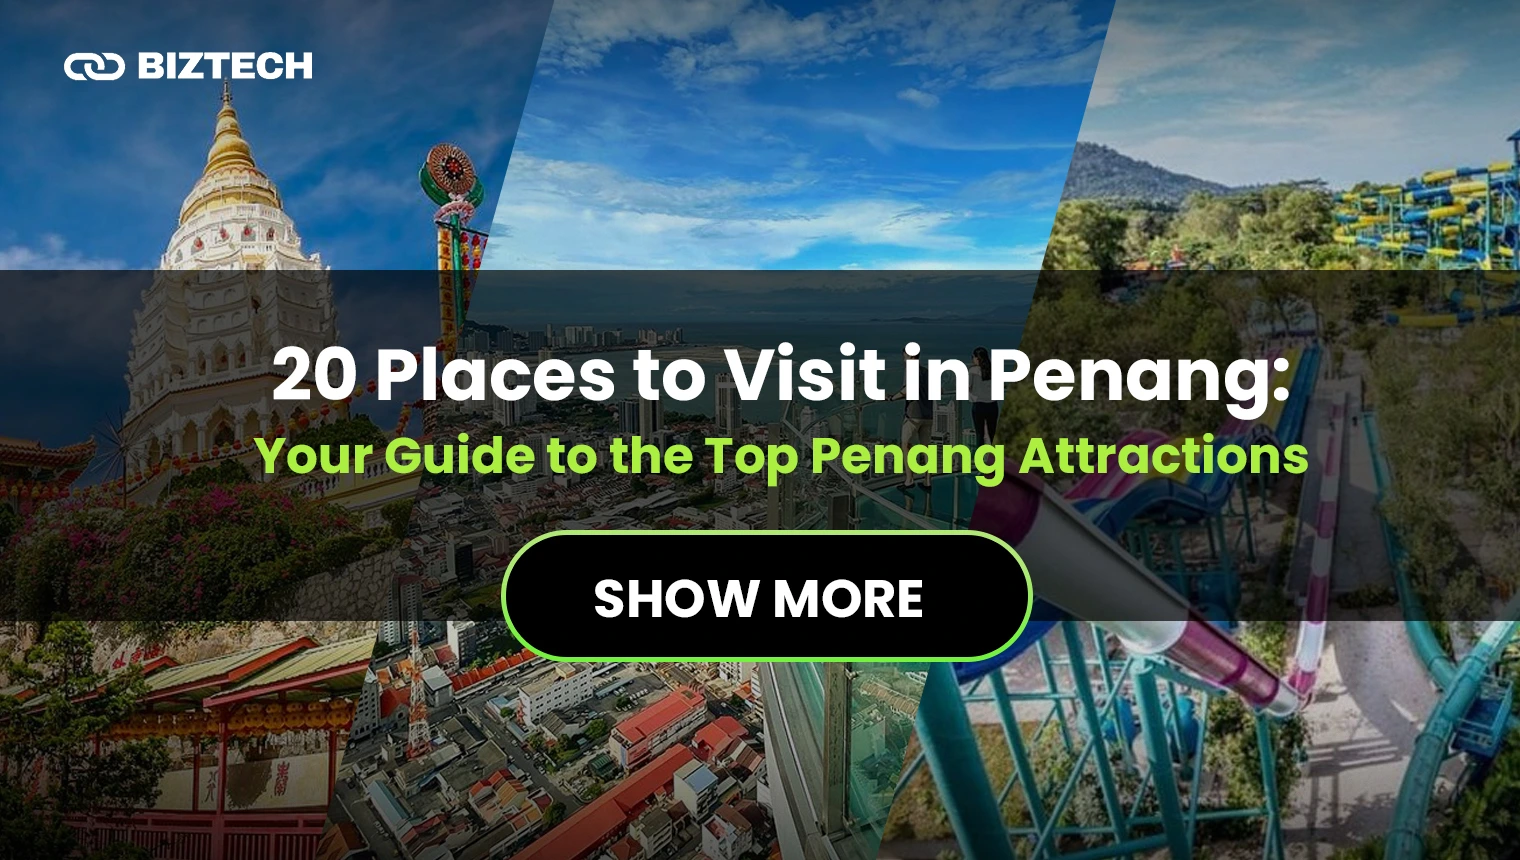 20 Places to Visit in Penang: Your Guide to the Top Penang Attractions